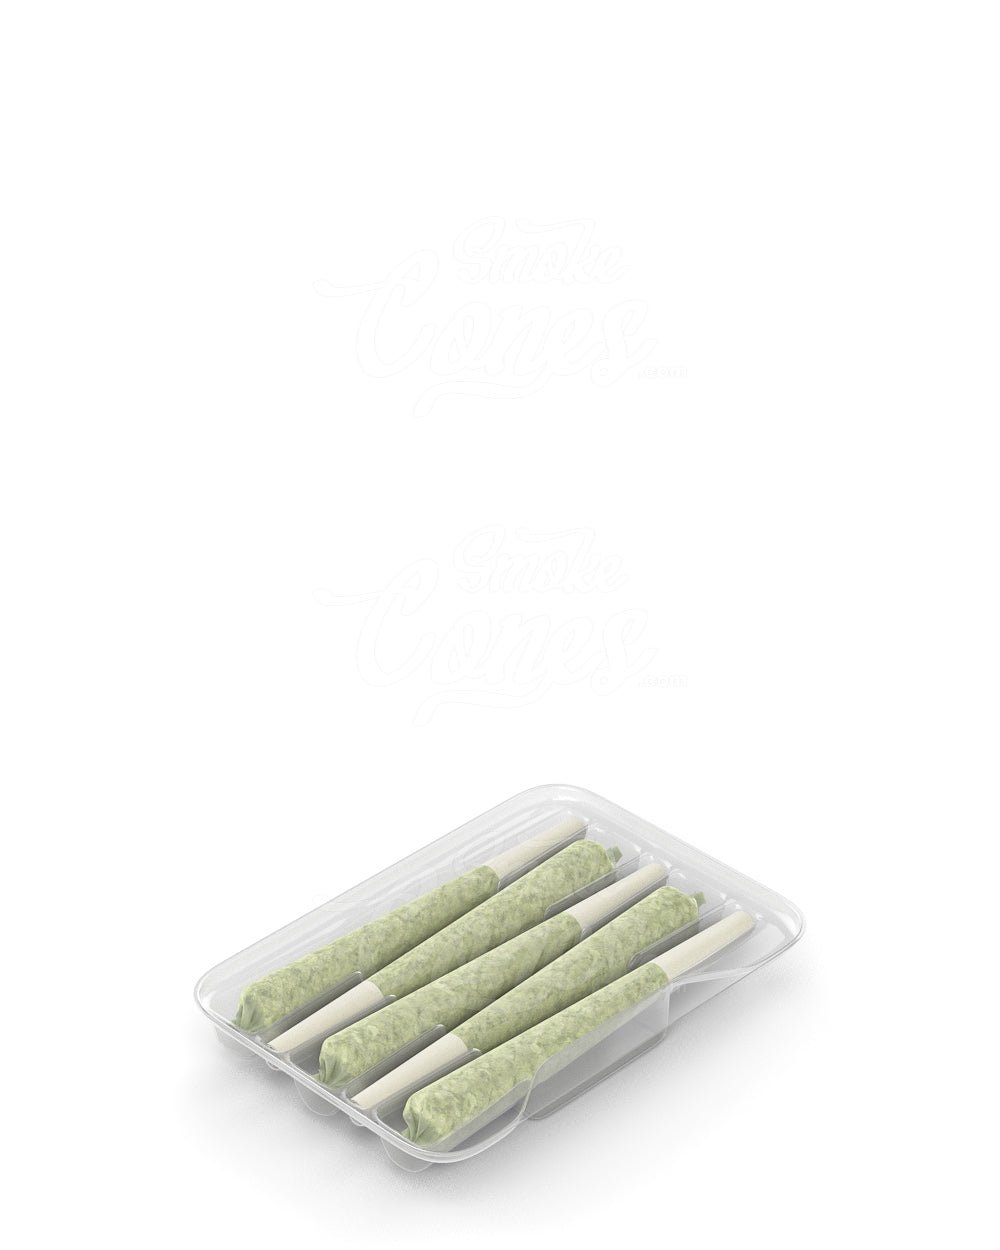 Clear Edible & Joint Box Plastic Insert Tray for 5 Mini 70mm Pre Rolled Cones 100/Box - 2